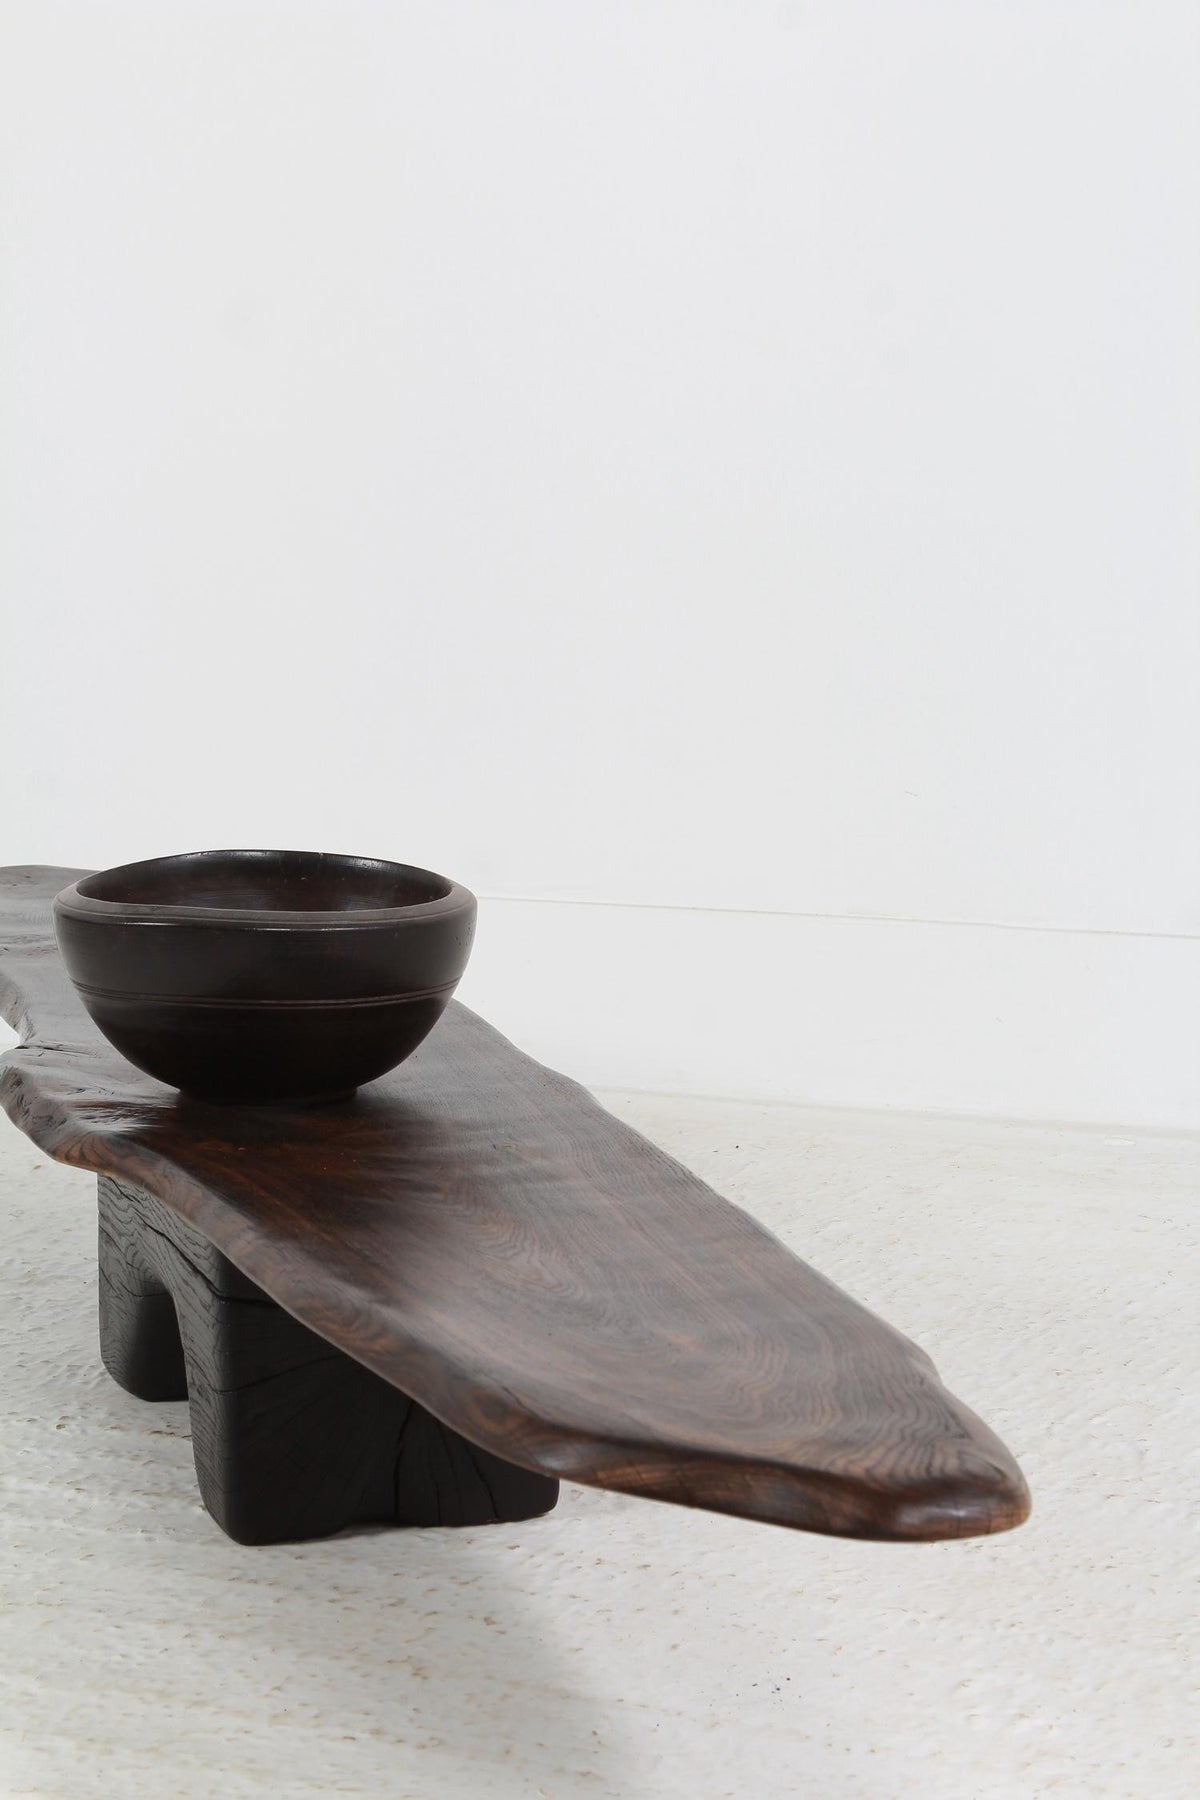 Beautifully SCULPTURAL Contemporary  Oak Japanese-inspired coffee table.Please Enquire